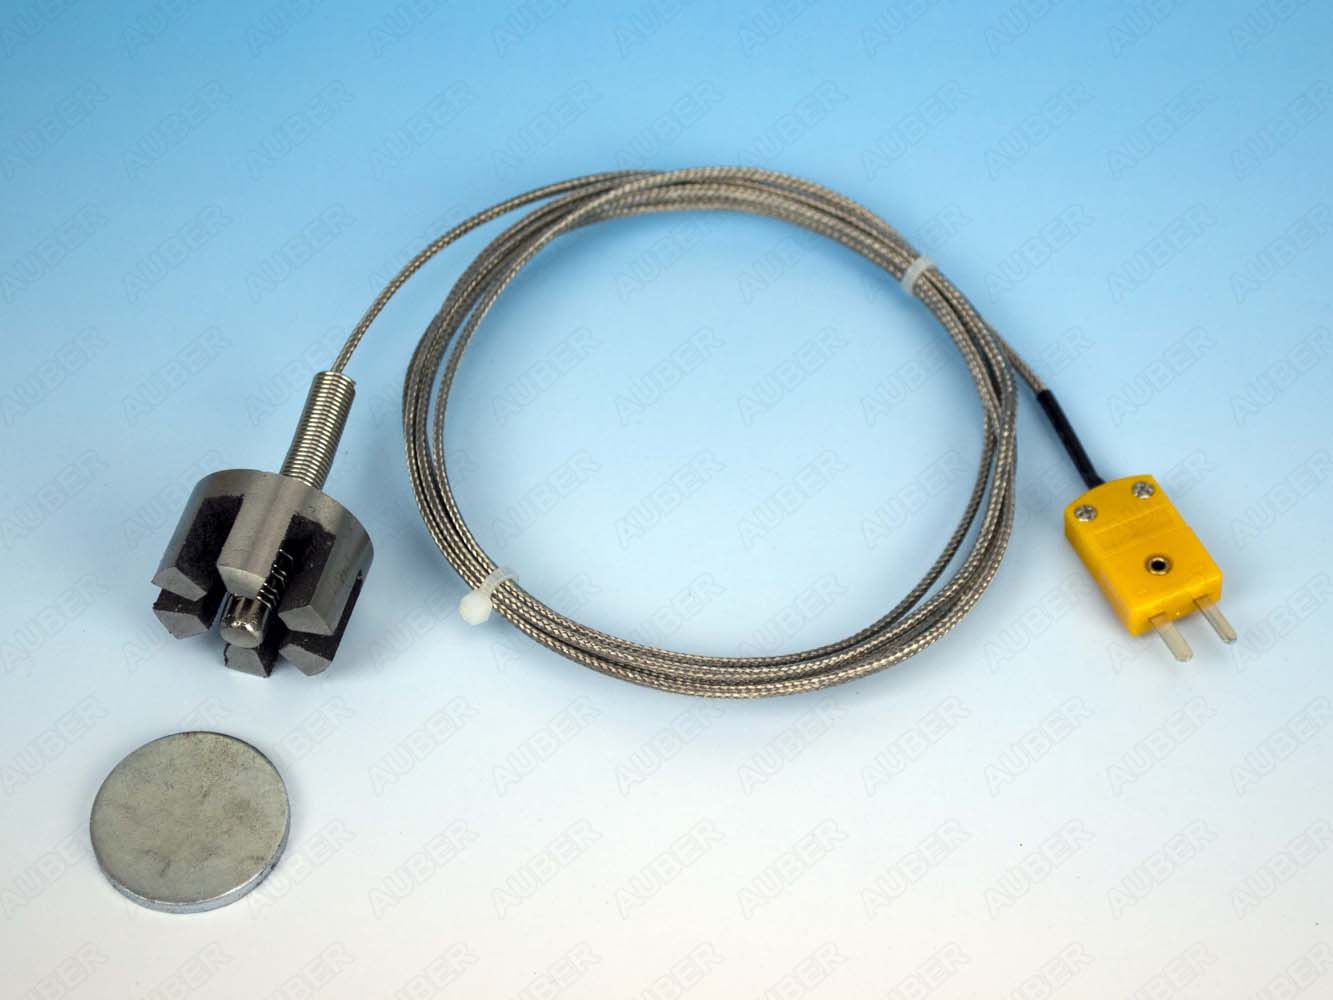 K Type Magnet Probe for Surfaces and Walls